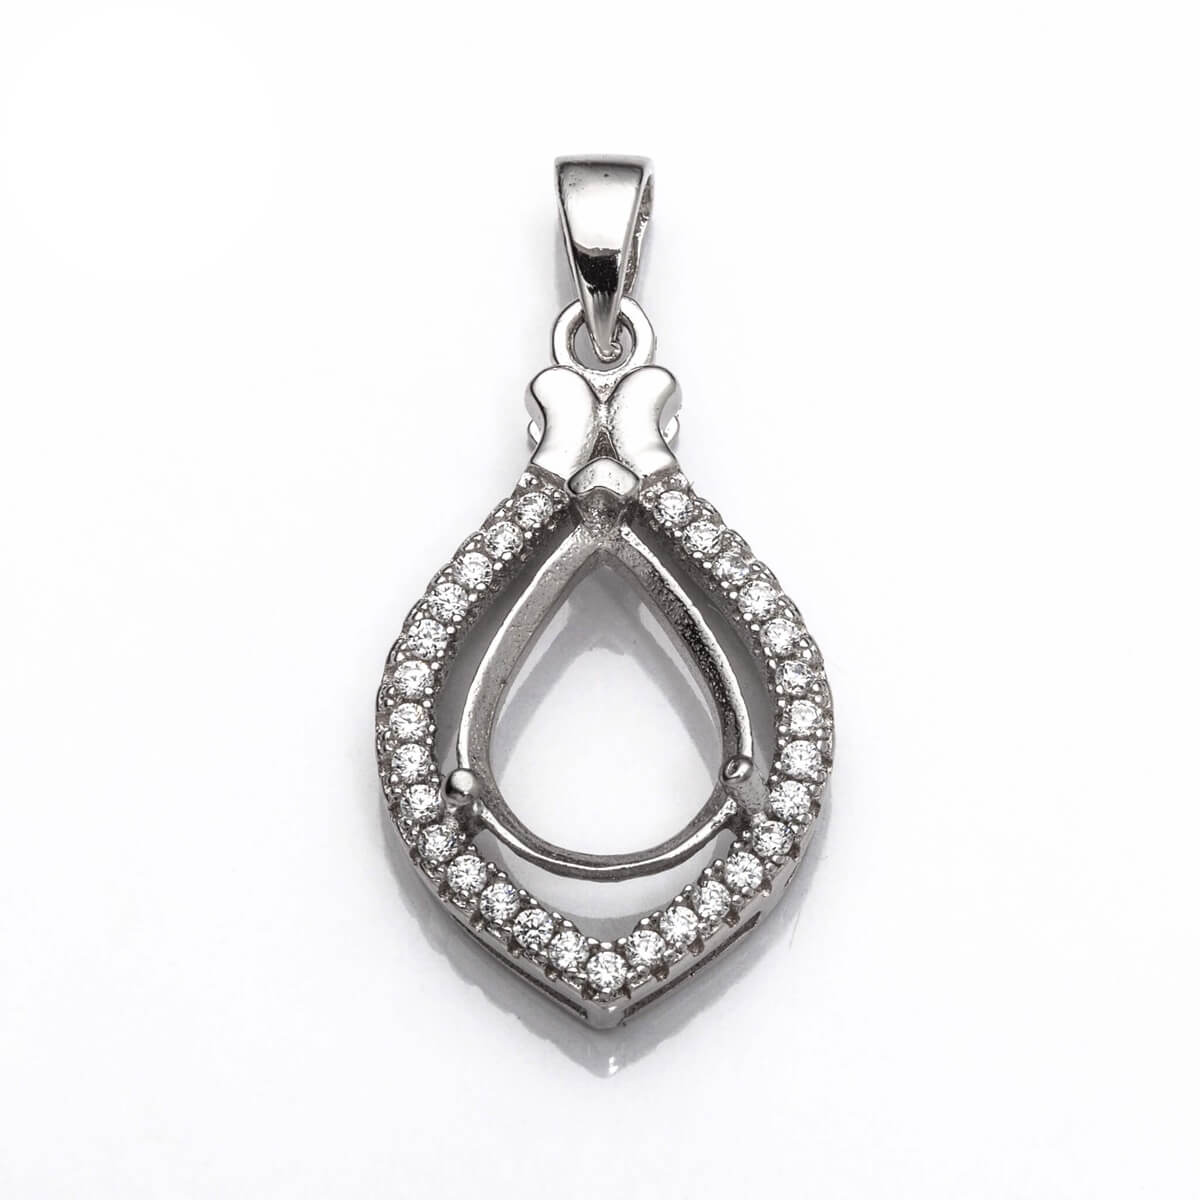 Pear Pendant with Cubic Zirconia Inlays and Pear Shape Mounting and Bail in Sterling Silver 8x10mm 